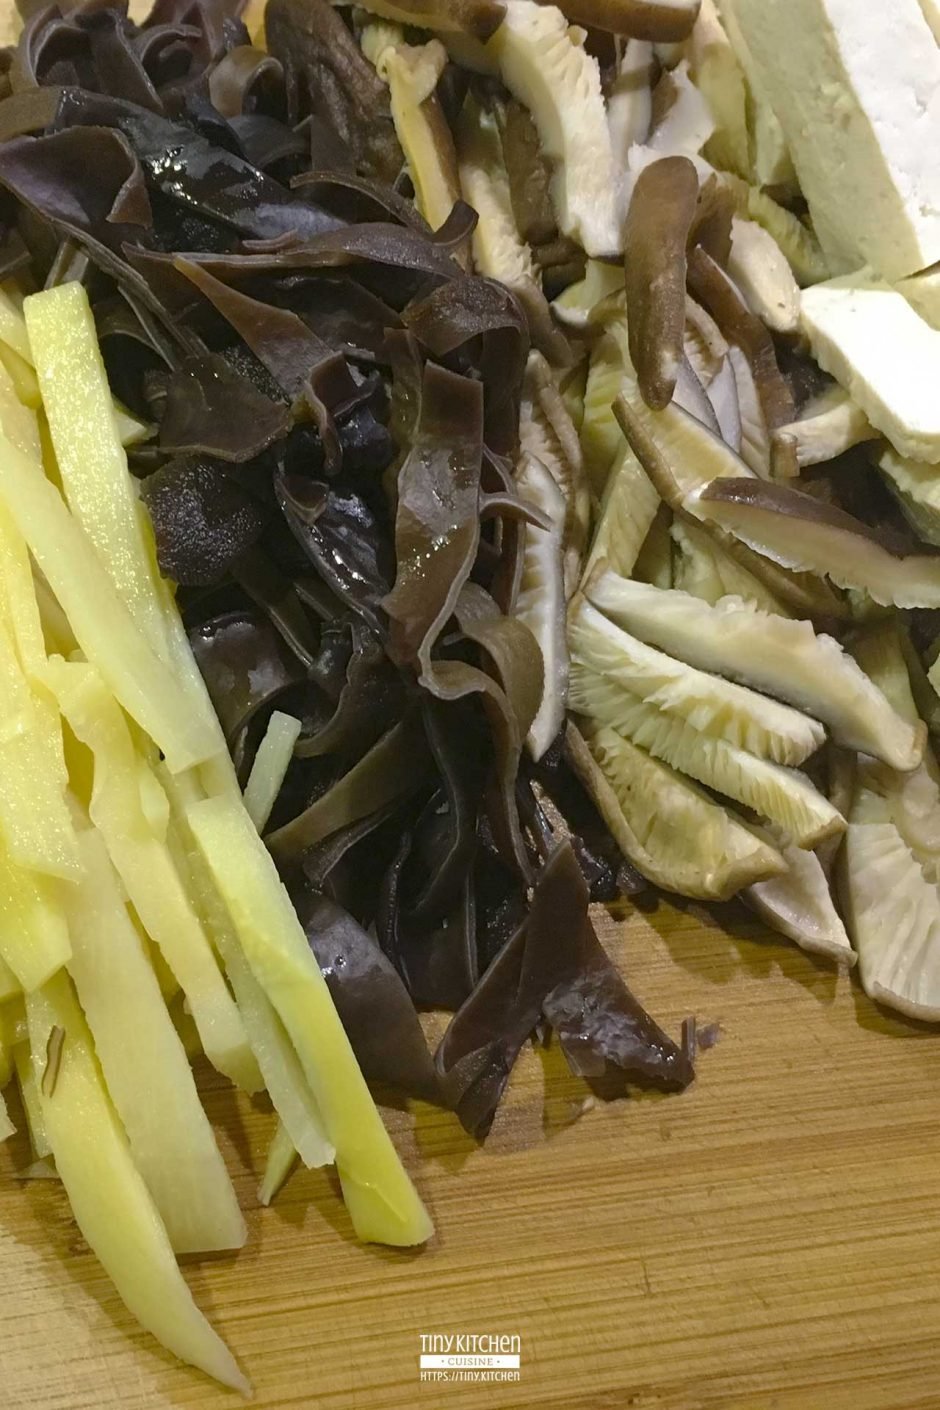 Bamboo shoots, wood ear mushrooms, shiitake mushrooms, and tofu sliced and prepared for Hot and Sour Soup.